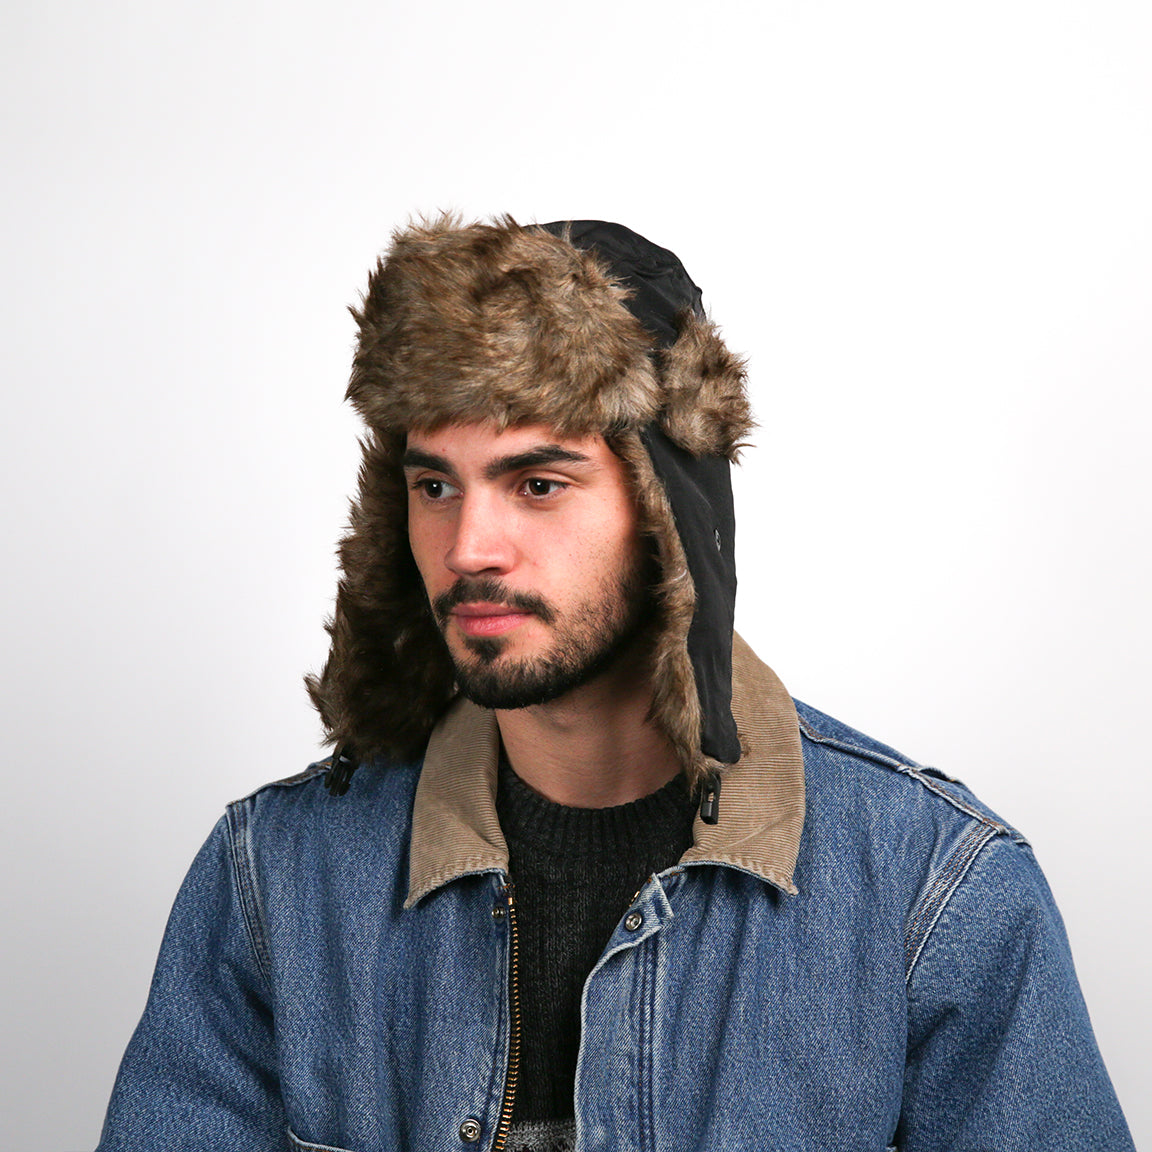 A person is shown wearing an aviator hat with a brown faux fur lining and black outer shell. The hat features ear flaps that can be secured up or down and a buttoned chin strap.